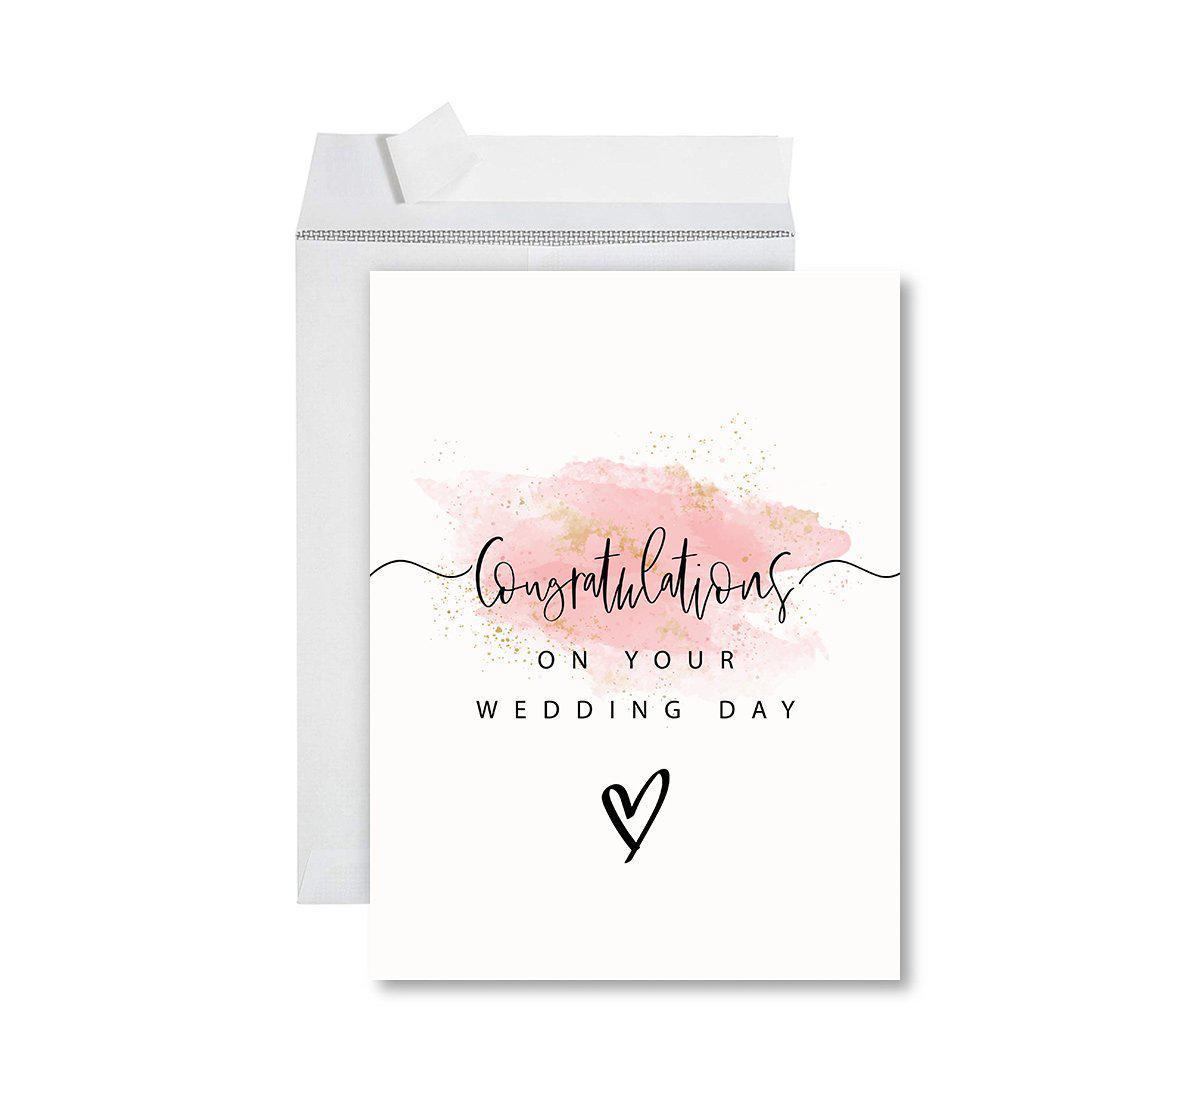 Congratulations on Setting Wedding Date | Greeting Card